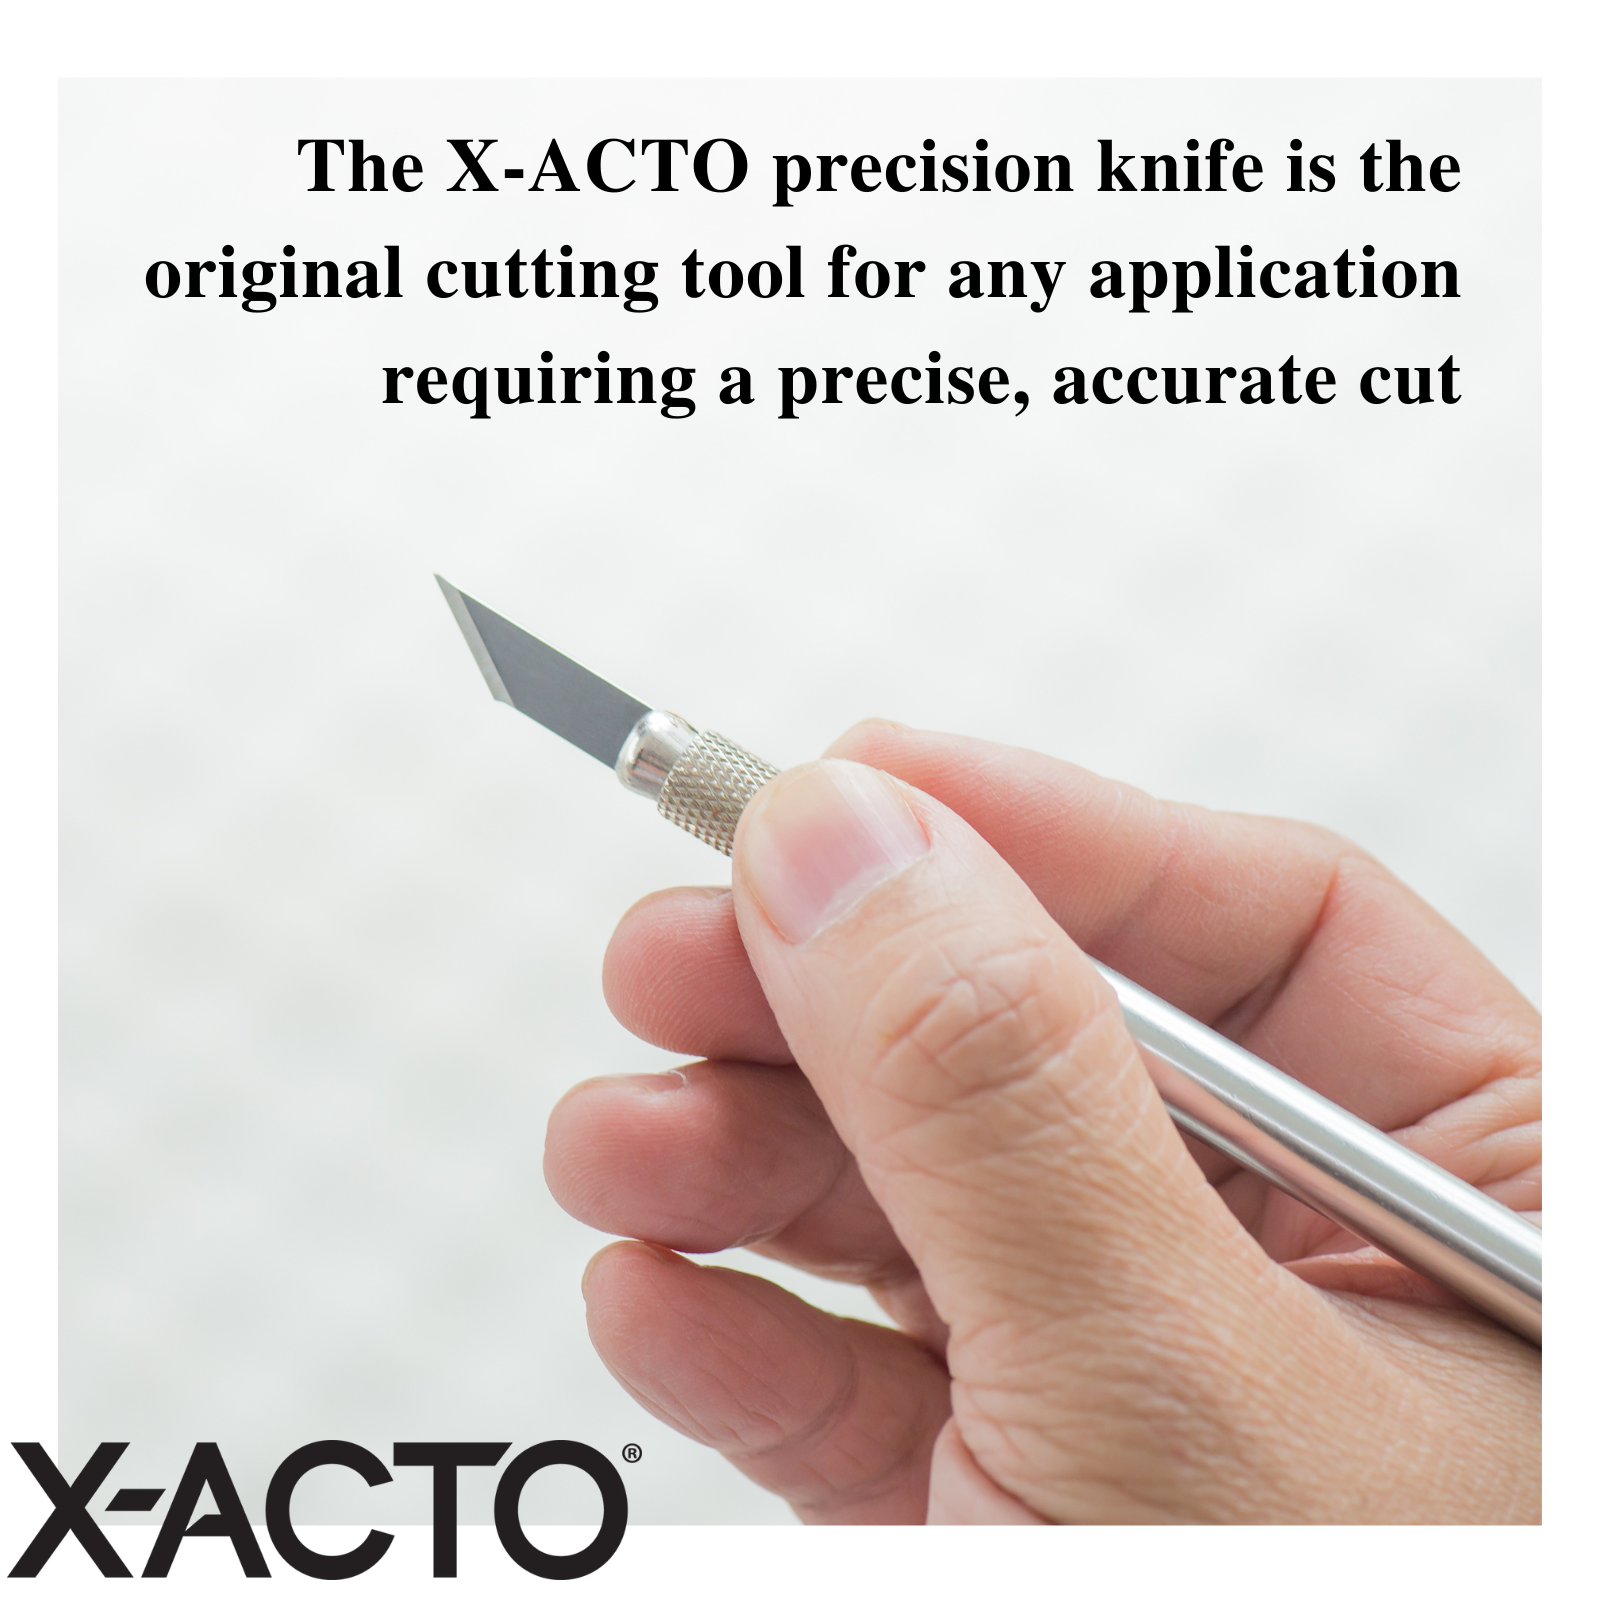 X-Acto Craft Knife Set, Precision Knife, Cutting, Tool, Trimming - offers superior cutting & ergonomic control